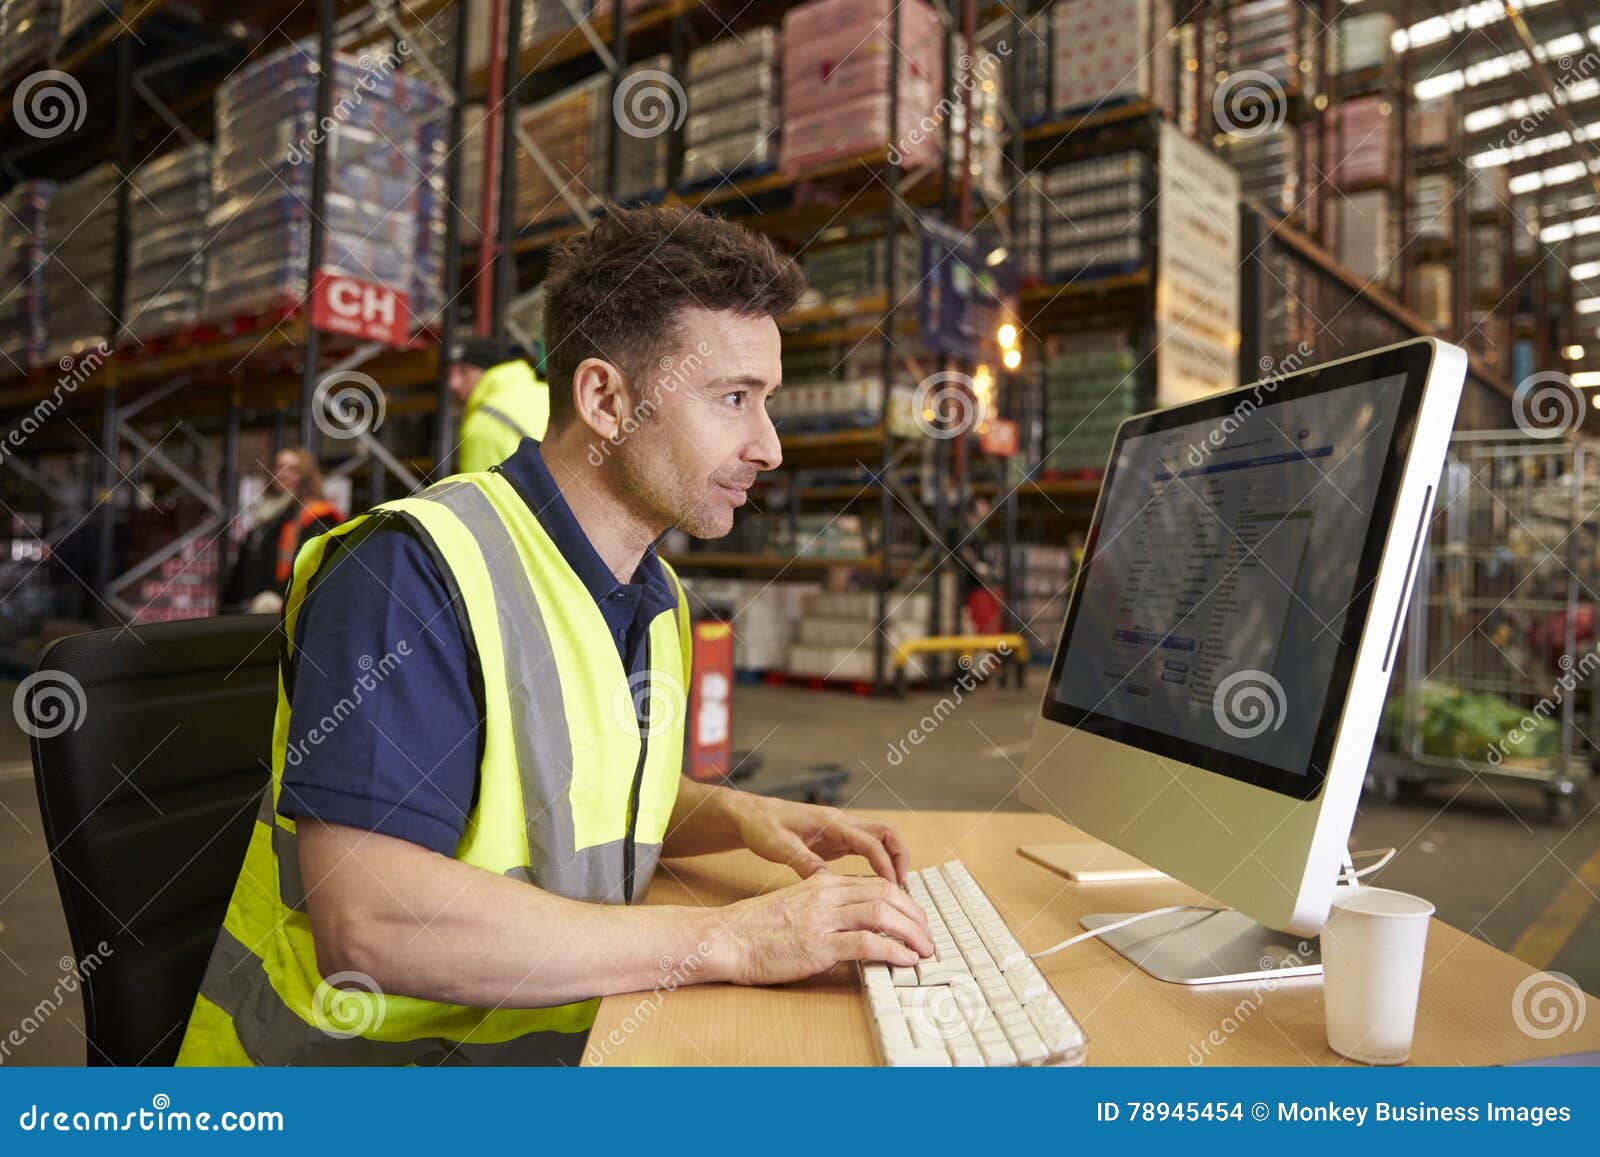 man working in on-site office at a distribution warehouse